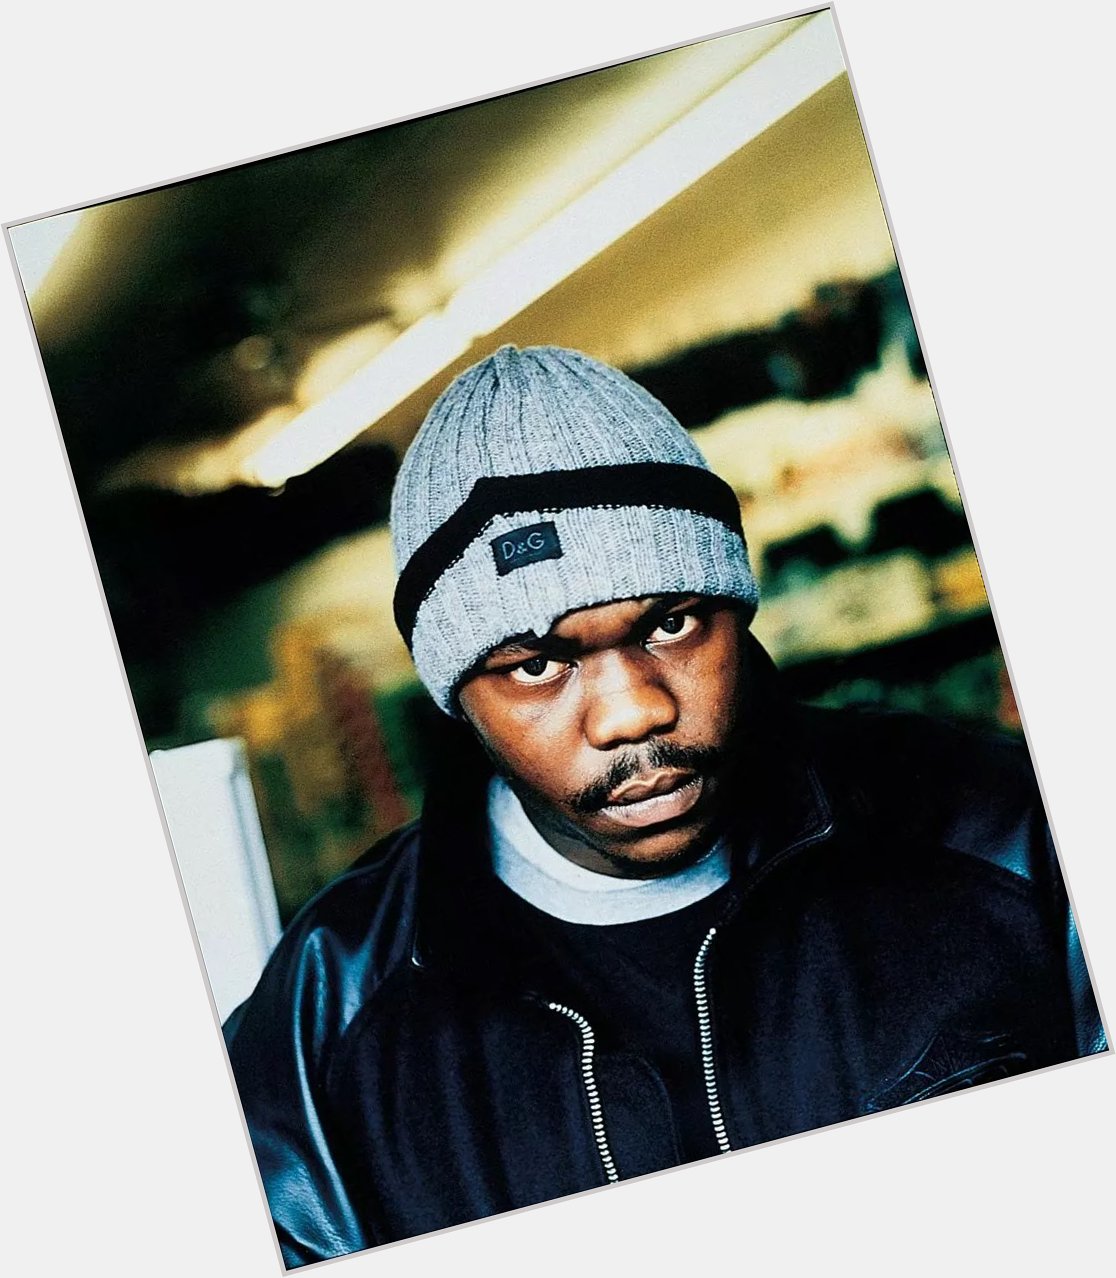 Salute and Happy Birthday Beanie Sigel !! 